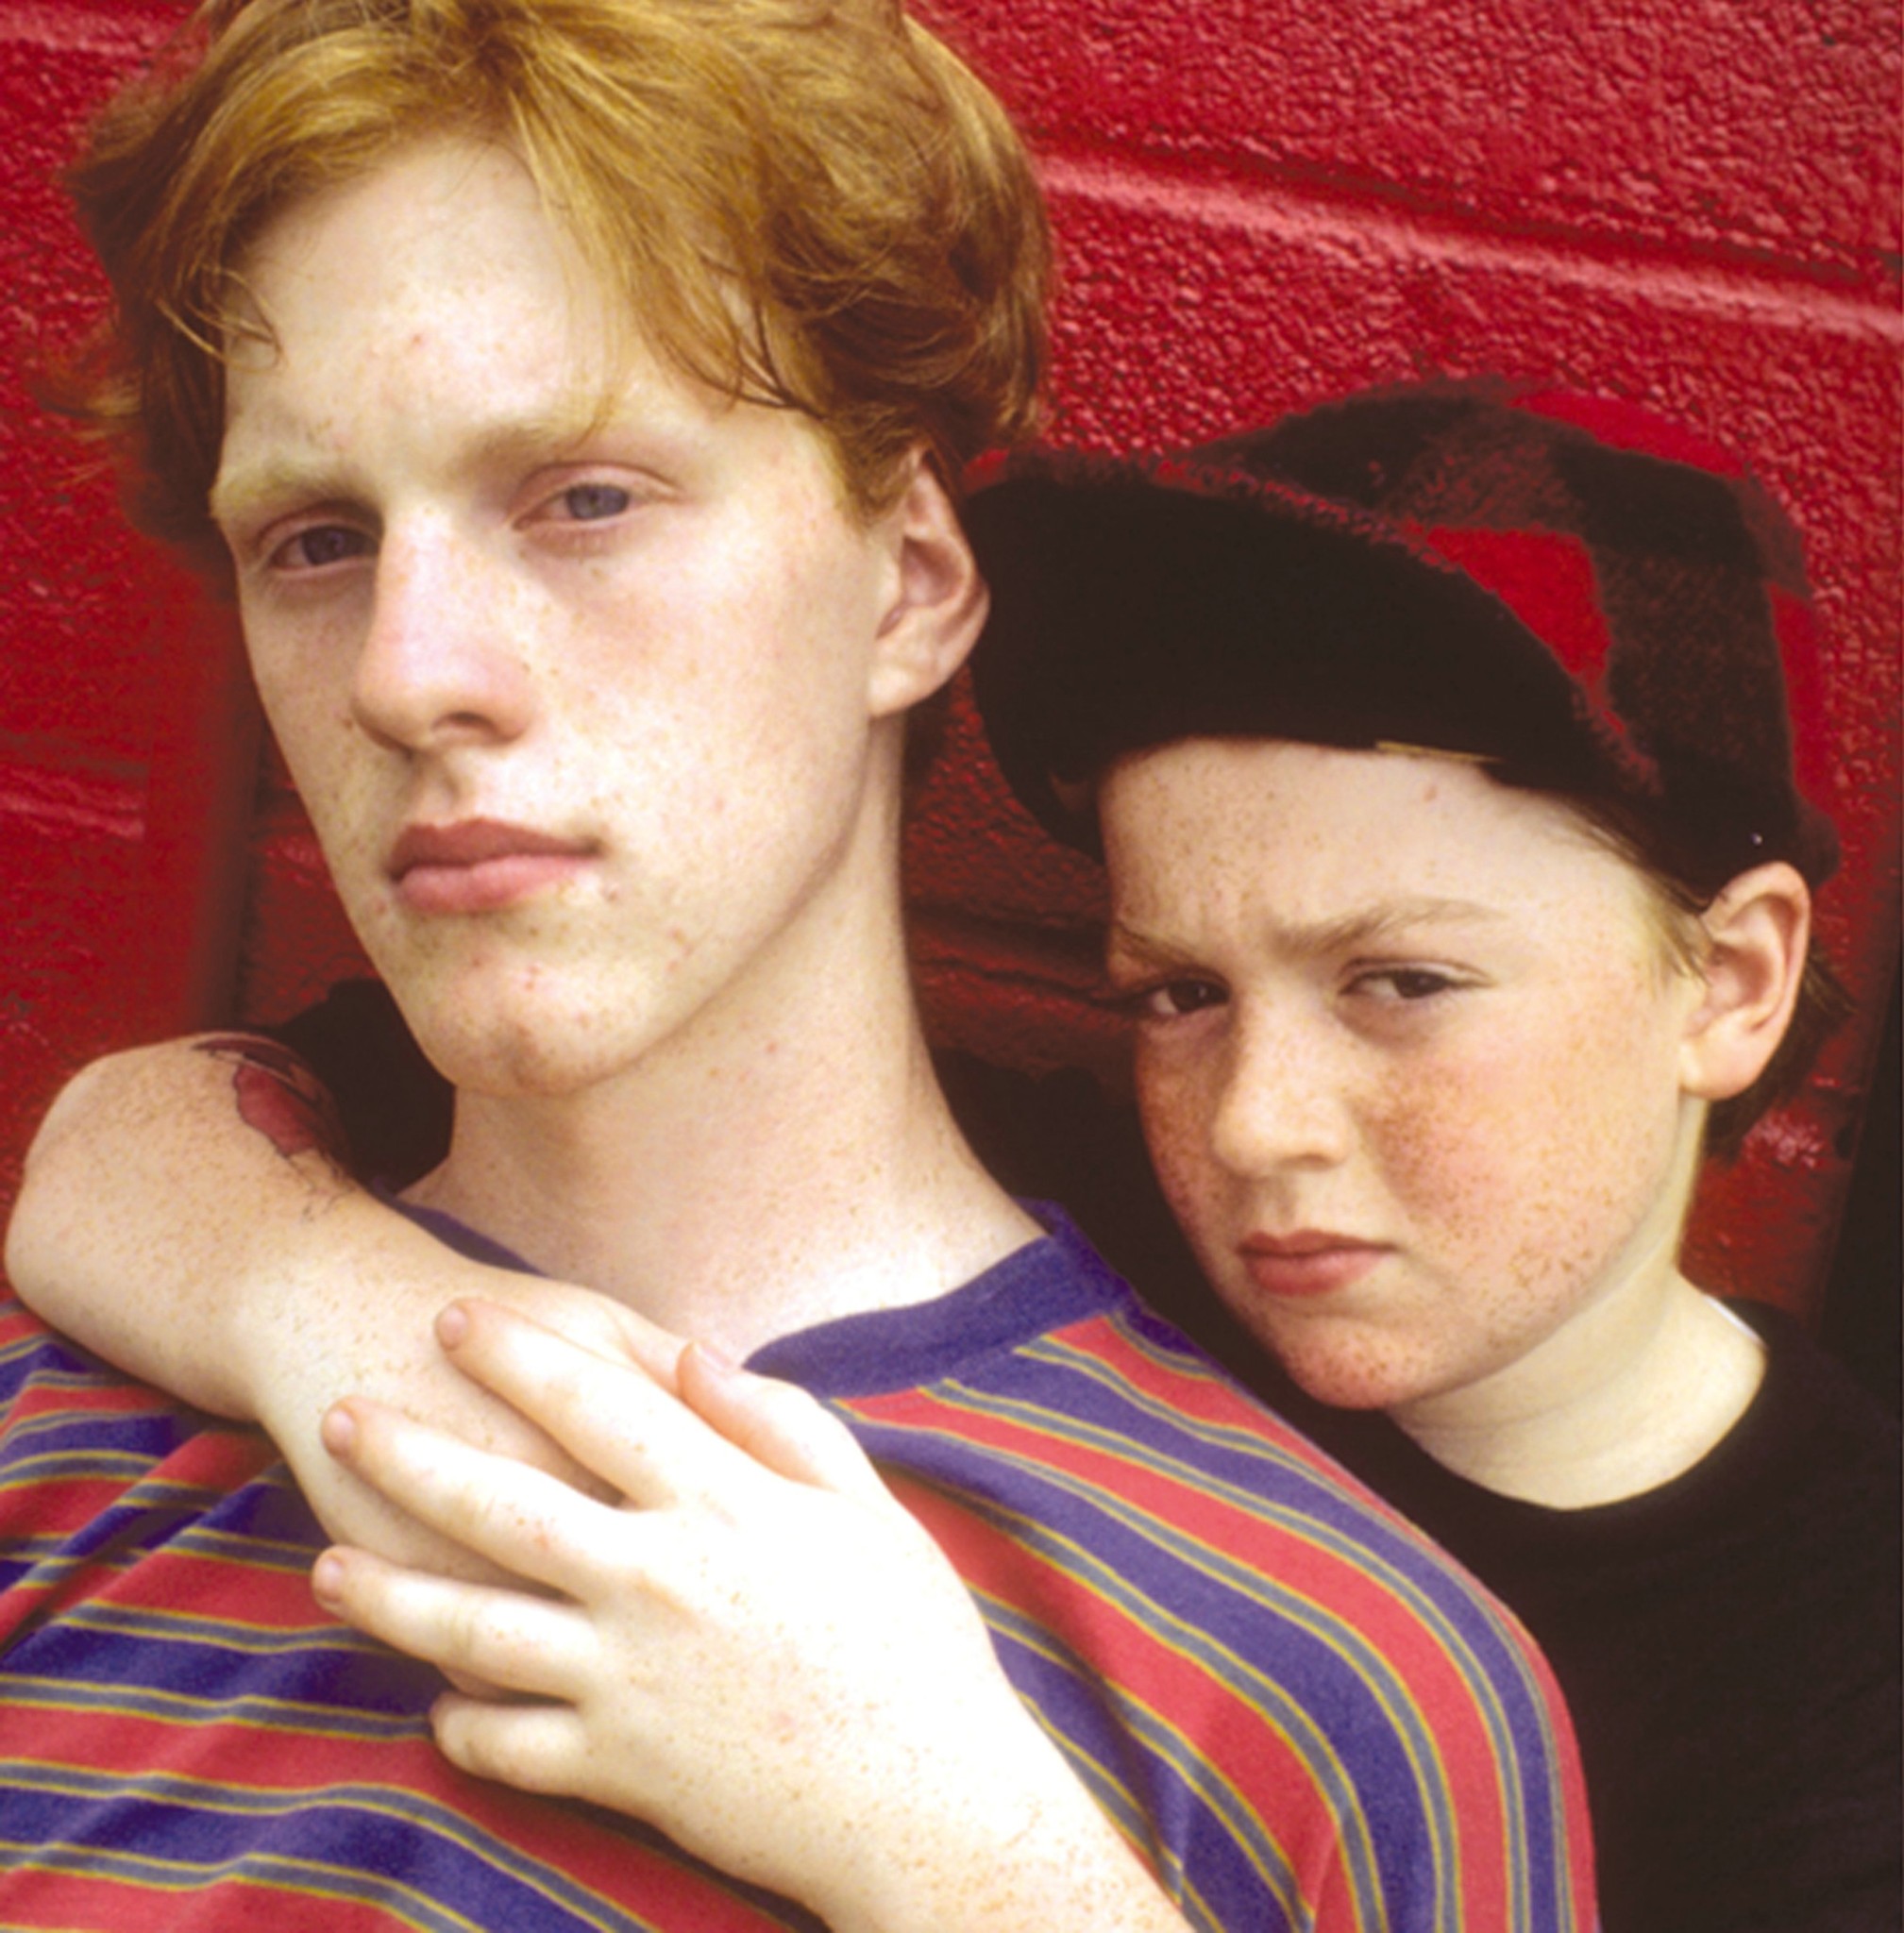 Still of Michael C. Maronna and Danny Tamberelli in The Adventures of Pete & Pete (1992)